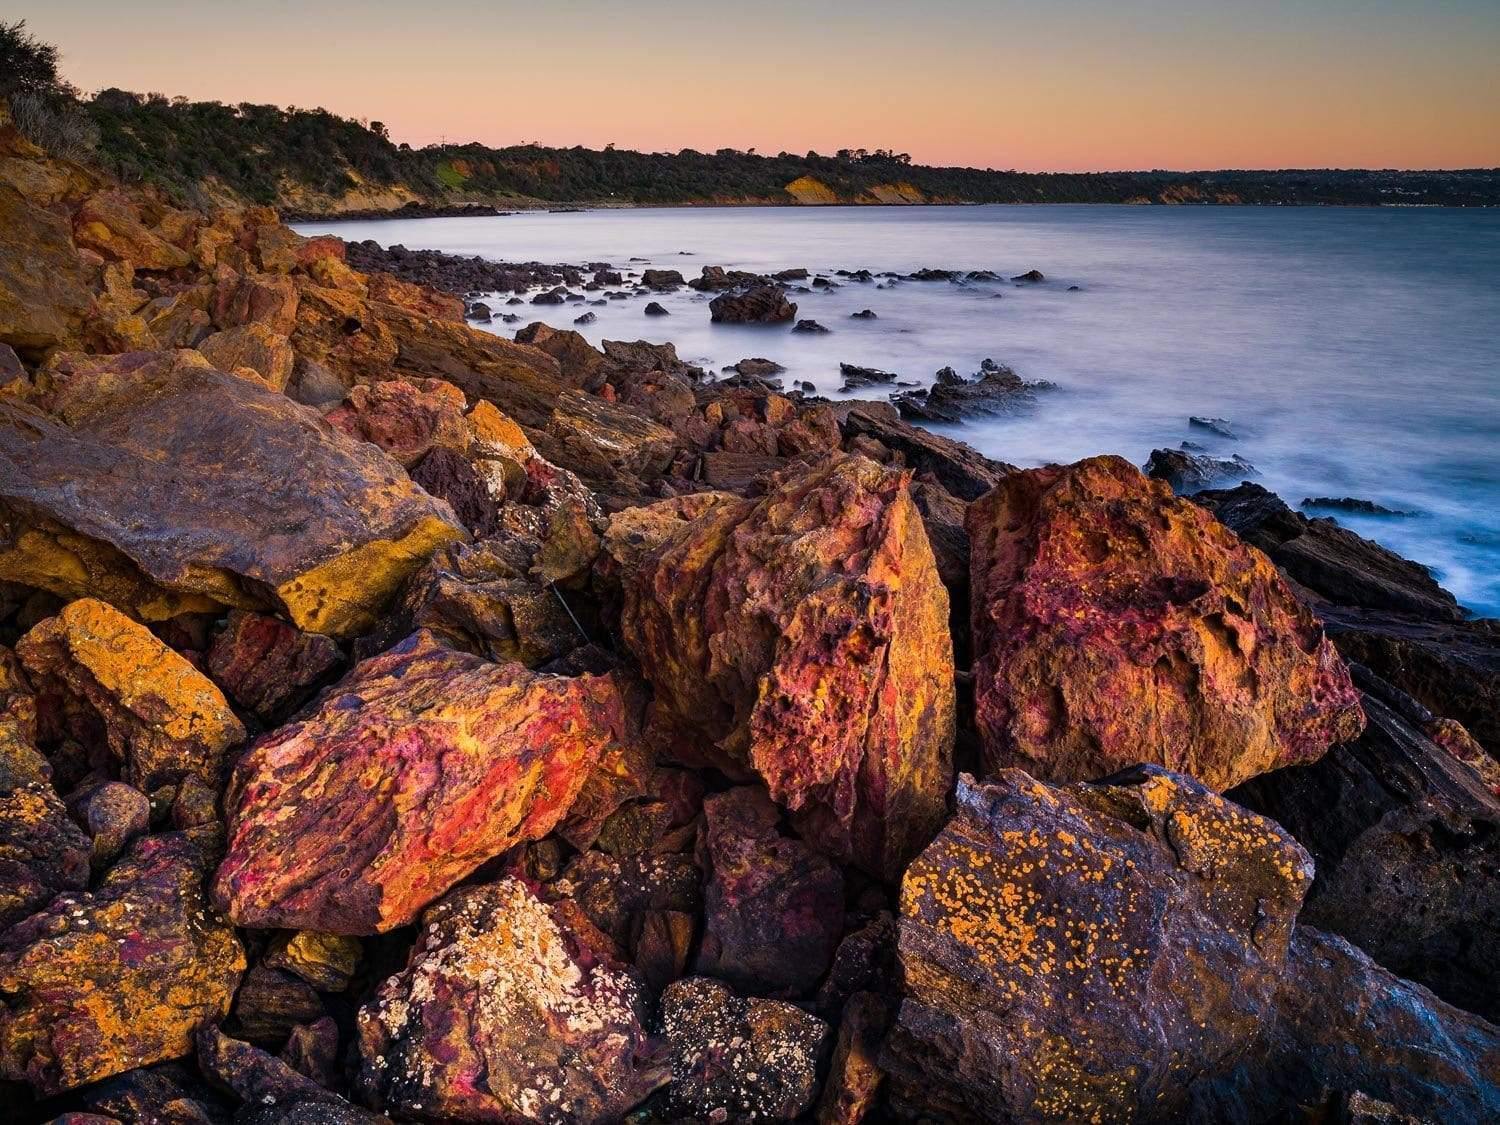 A closeup shot of rocky stones series with a natural texture and a seashore in the background, Coral Cove, Mt Martha - Mornington Peninsula Victoria